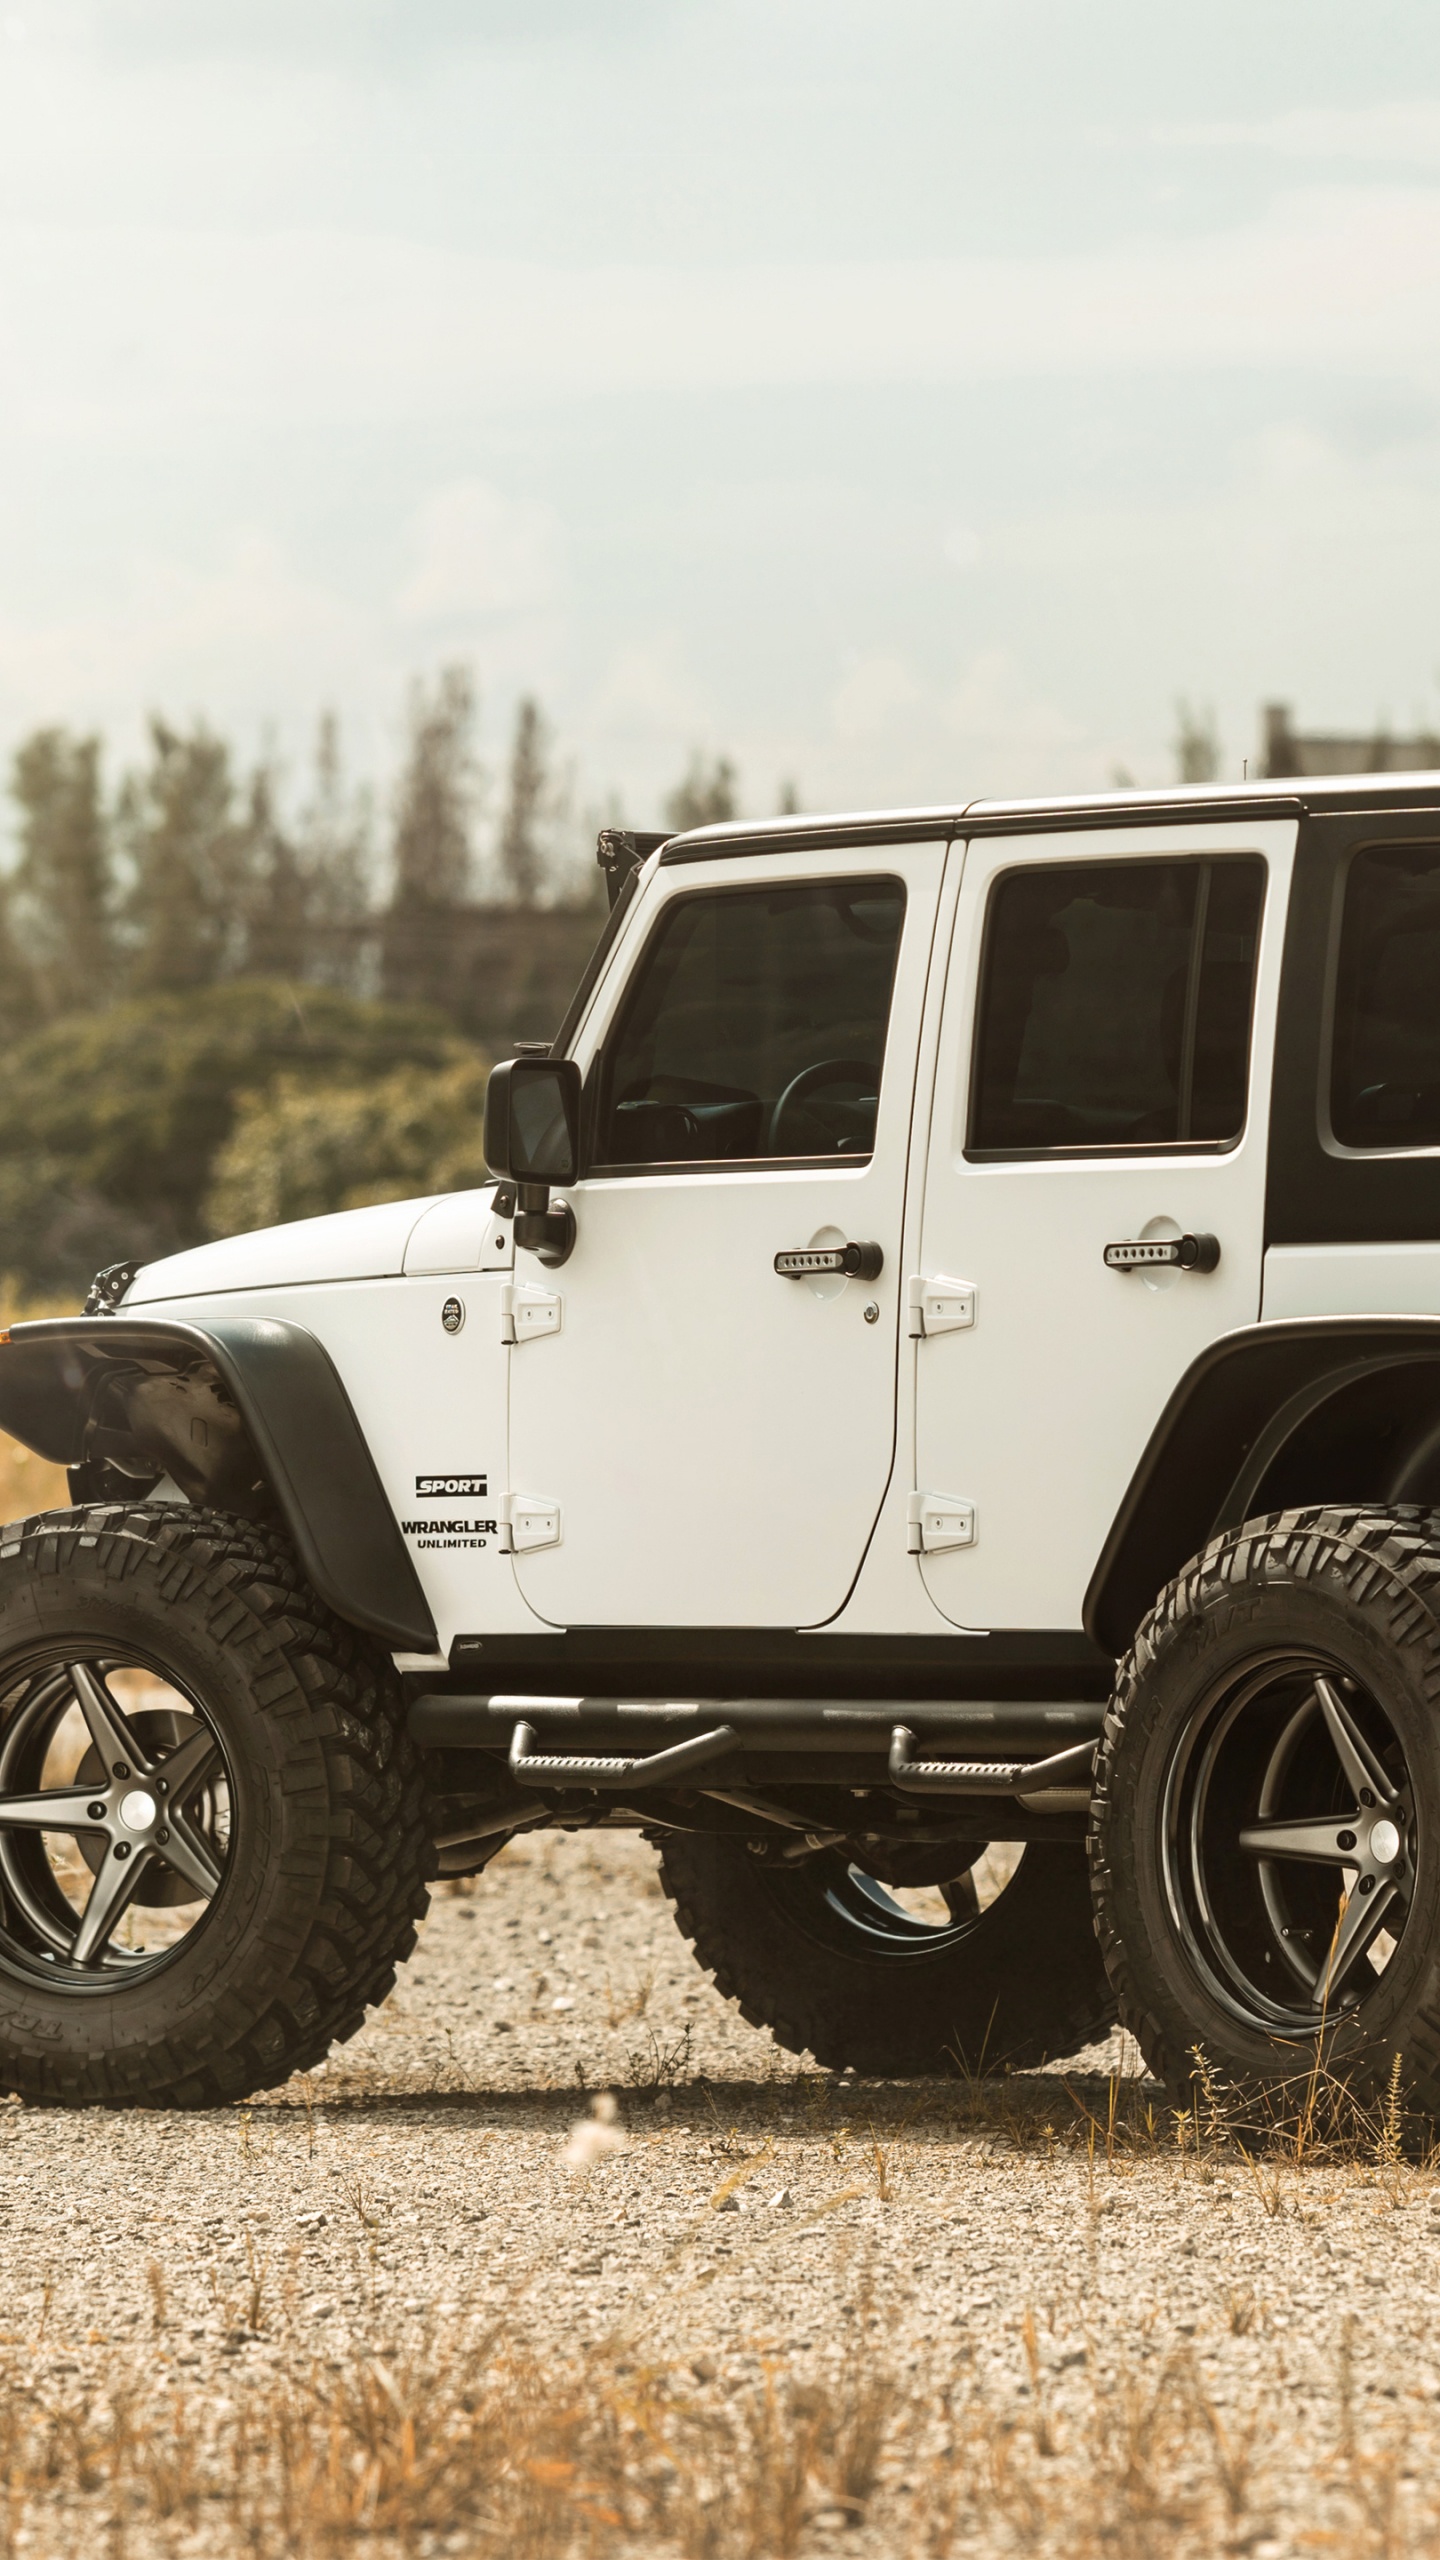 White and Black Jeep Wrangler on Brown Field During Daytime. Wallpaper in 1440x2560 Resolution